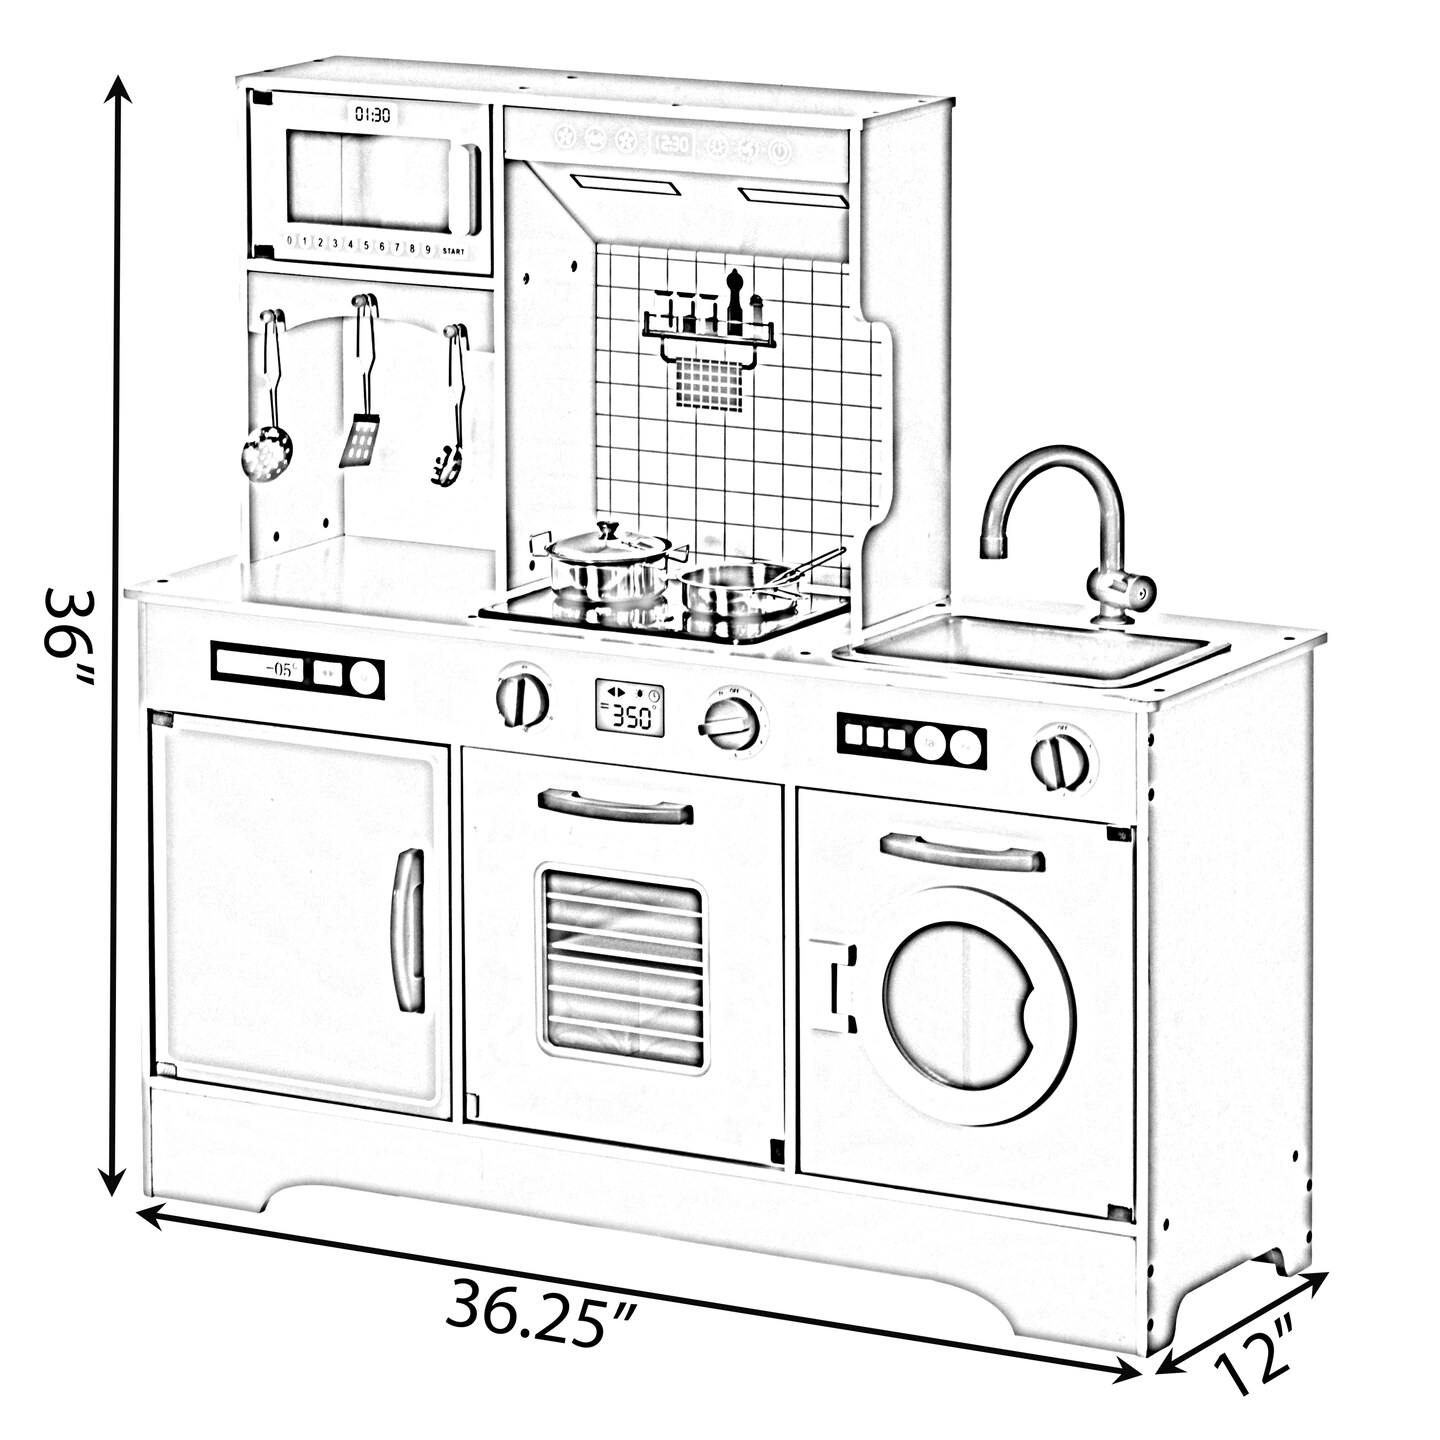 Wooden Play Kitchen Toy, Light on Microwave, Cabinet, Washer, Sound Electronic Stove, Microwave and Sink Ages 3+